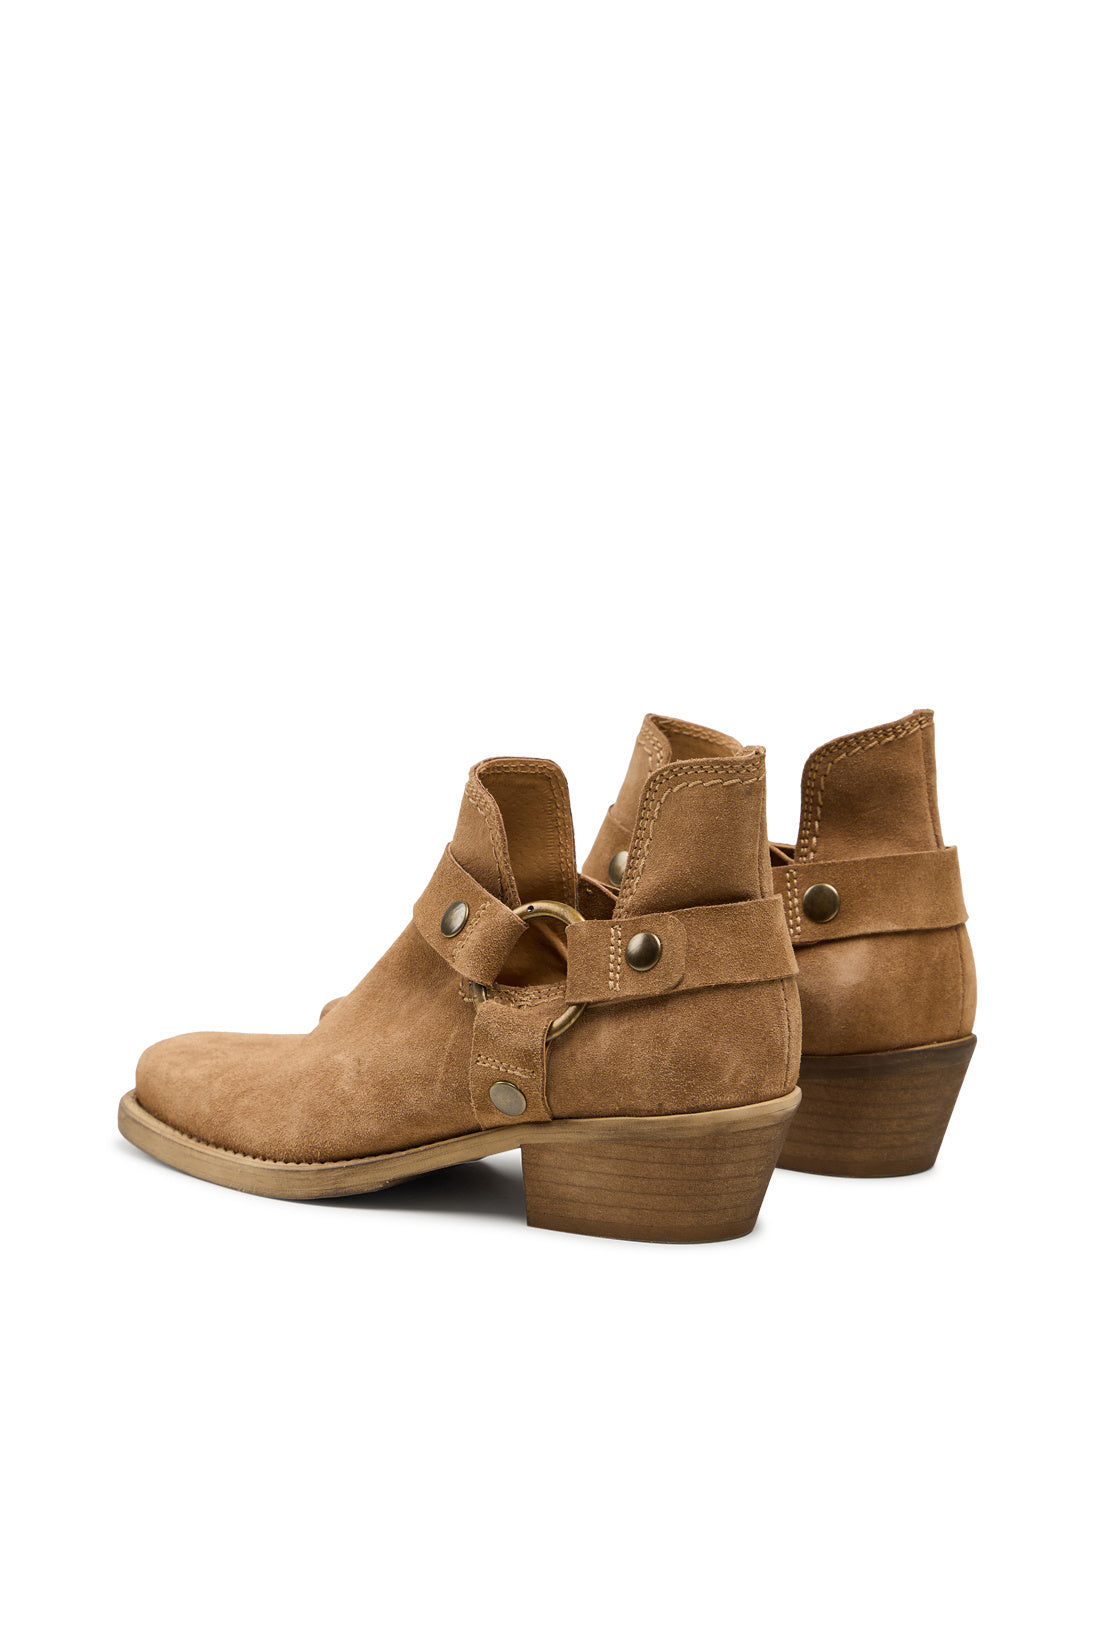 Lauryn Leather Boot - Taupe Suede